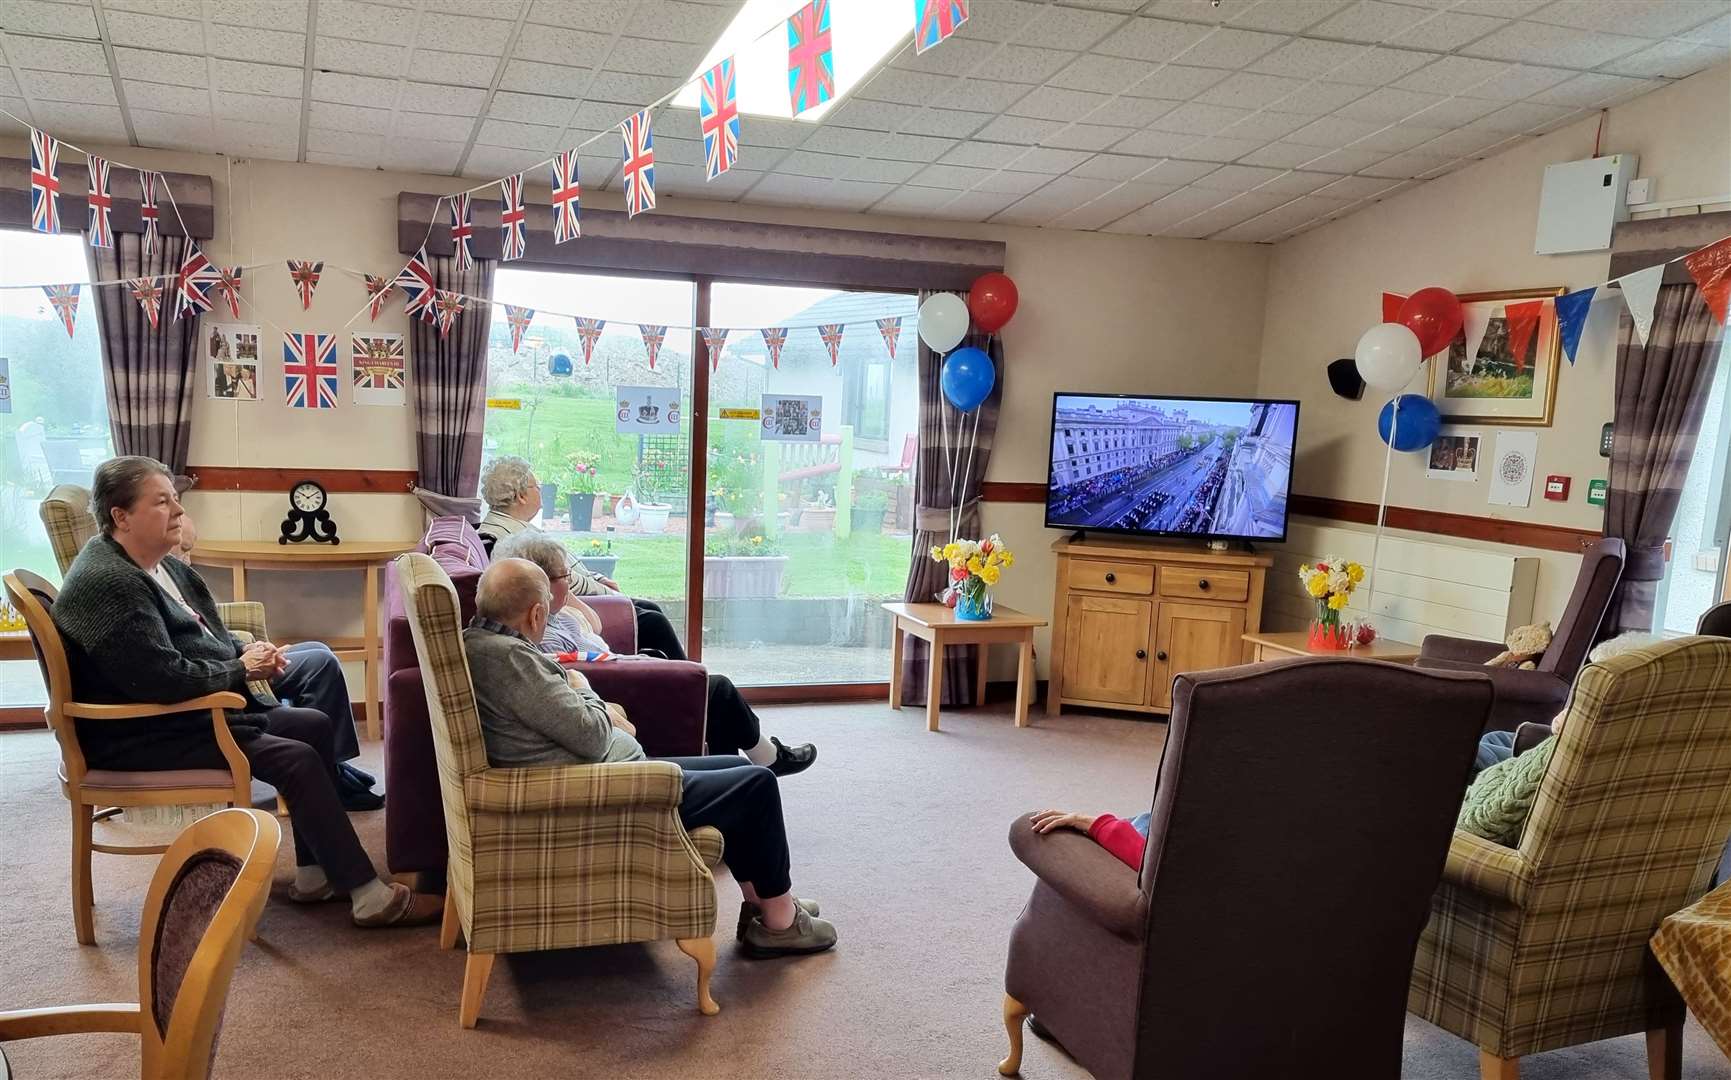 Seaview House residents avidly watching the coronation coverage on TV.